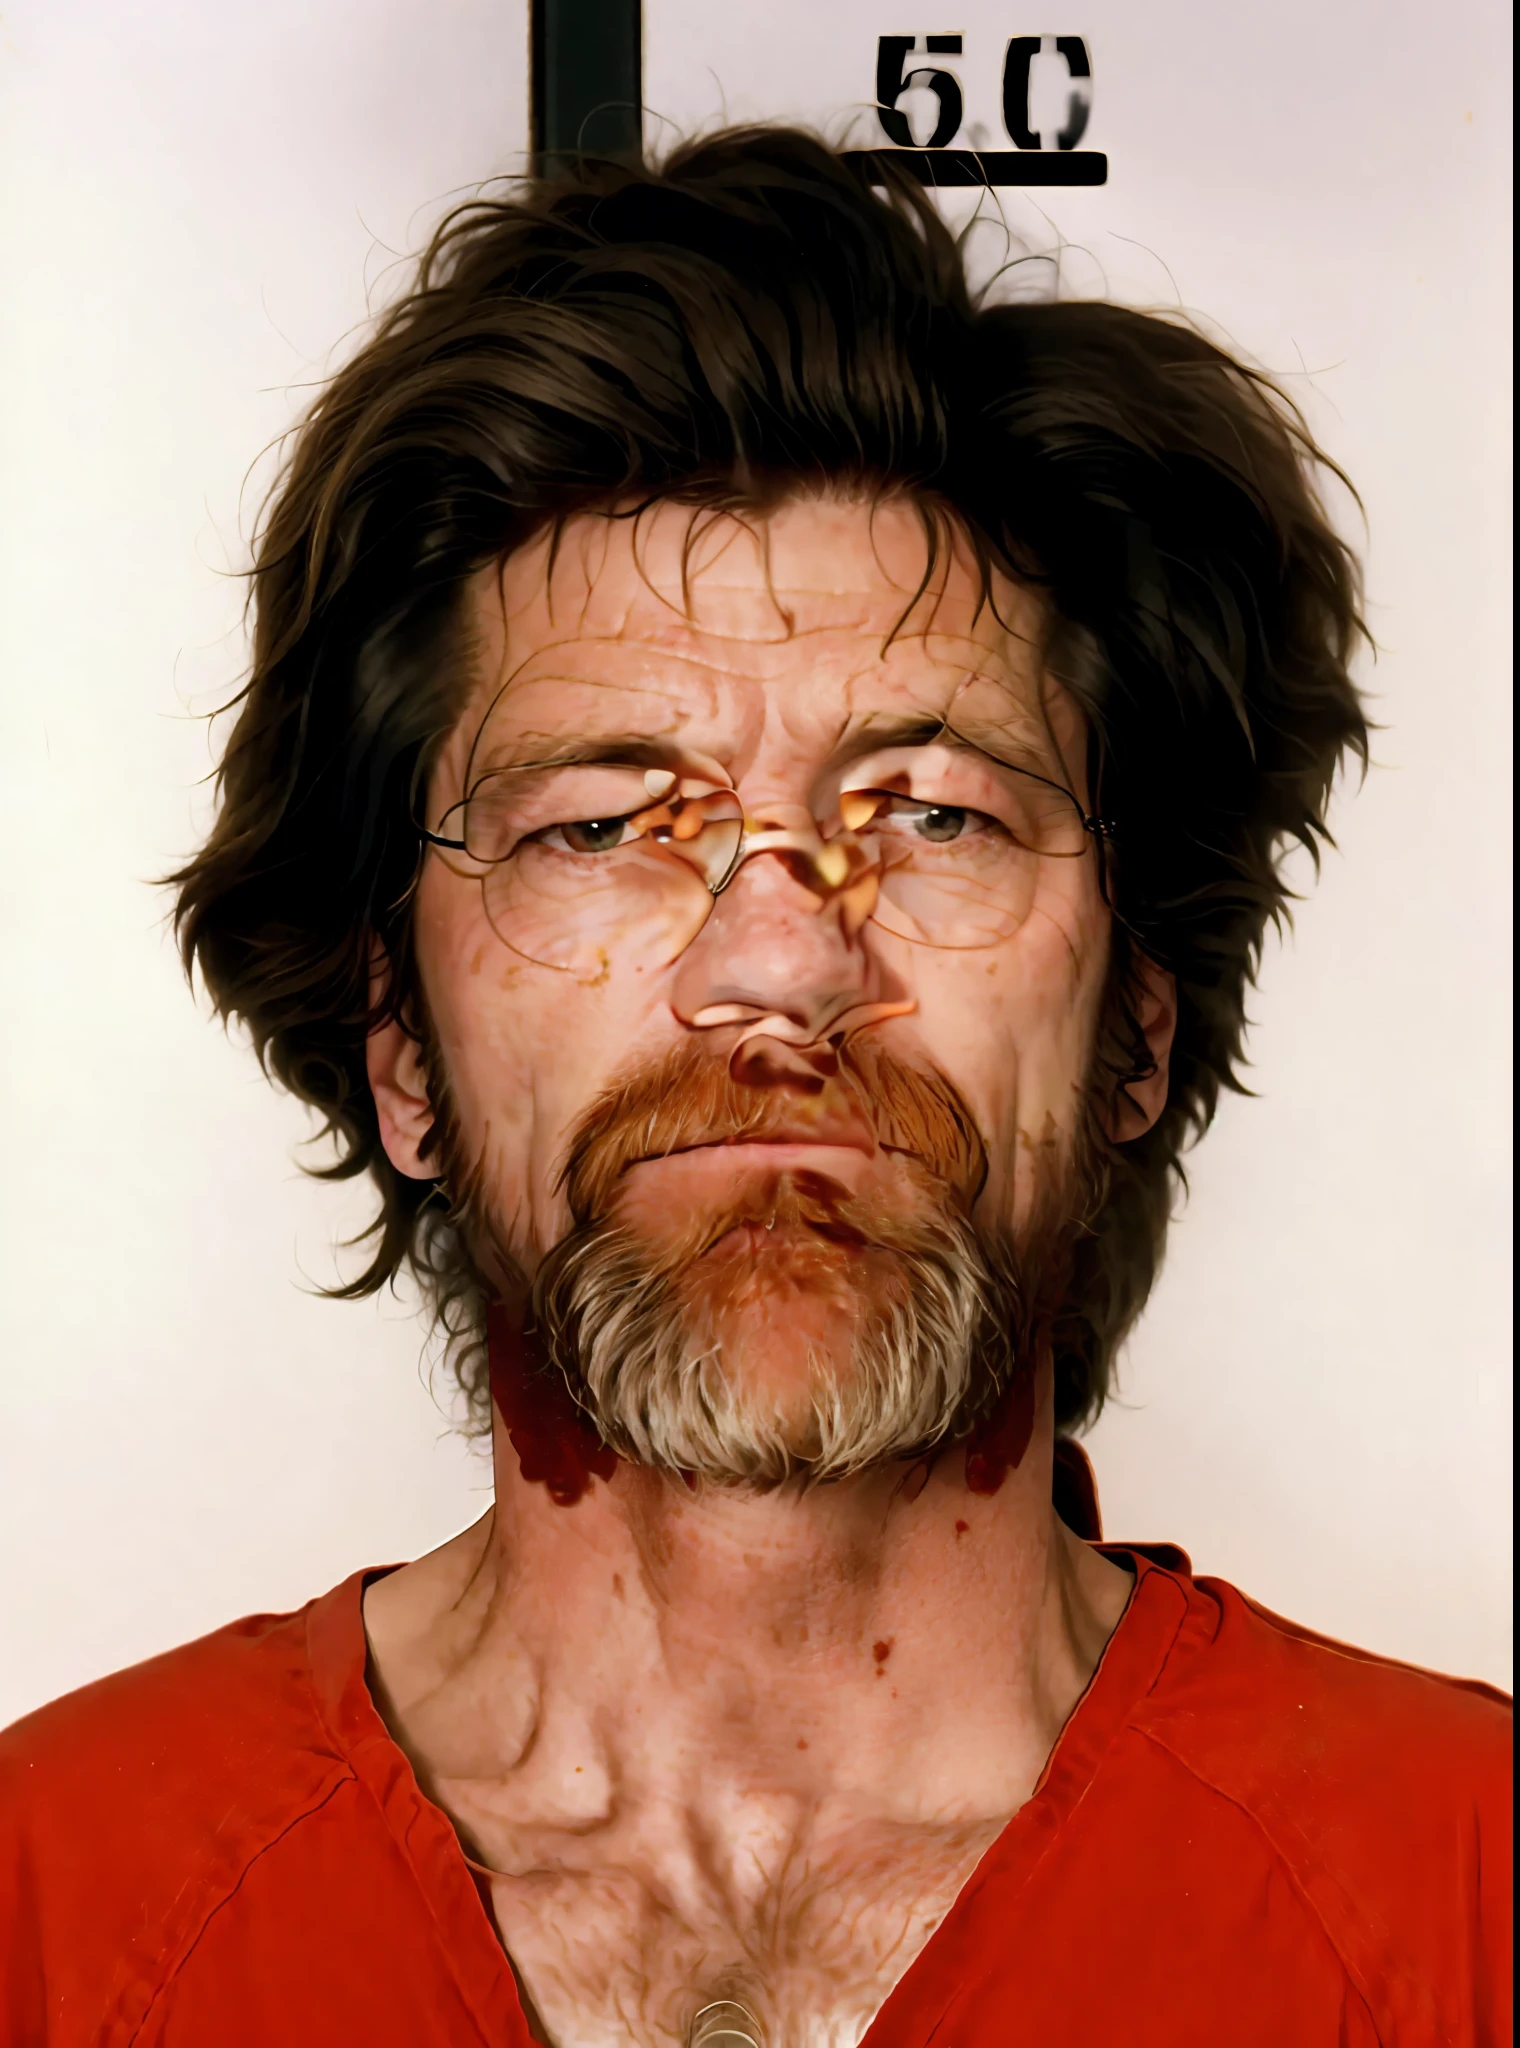 realistic, Man with beard and red shirt in mug photo, photo of a 50-year-old white man, photo of a shaggy man, Theodore John Kaczynski, scariest looking man alive, taken in the early 1990s, Vladimir Krisetskiy, Willem Dafoe, grainy photo of an ugly man, unabomber